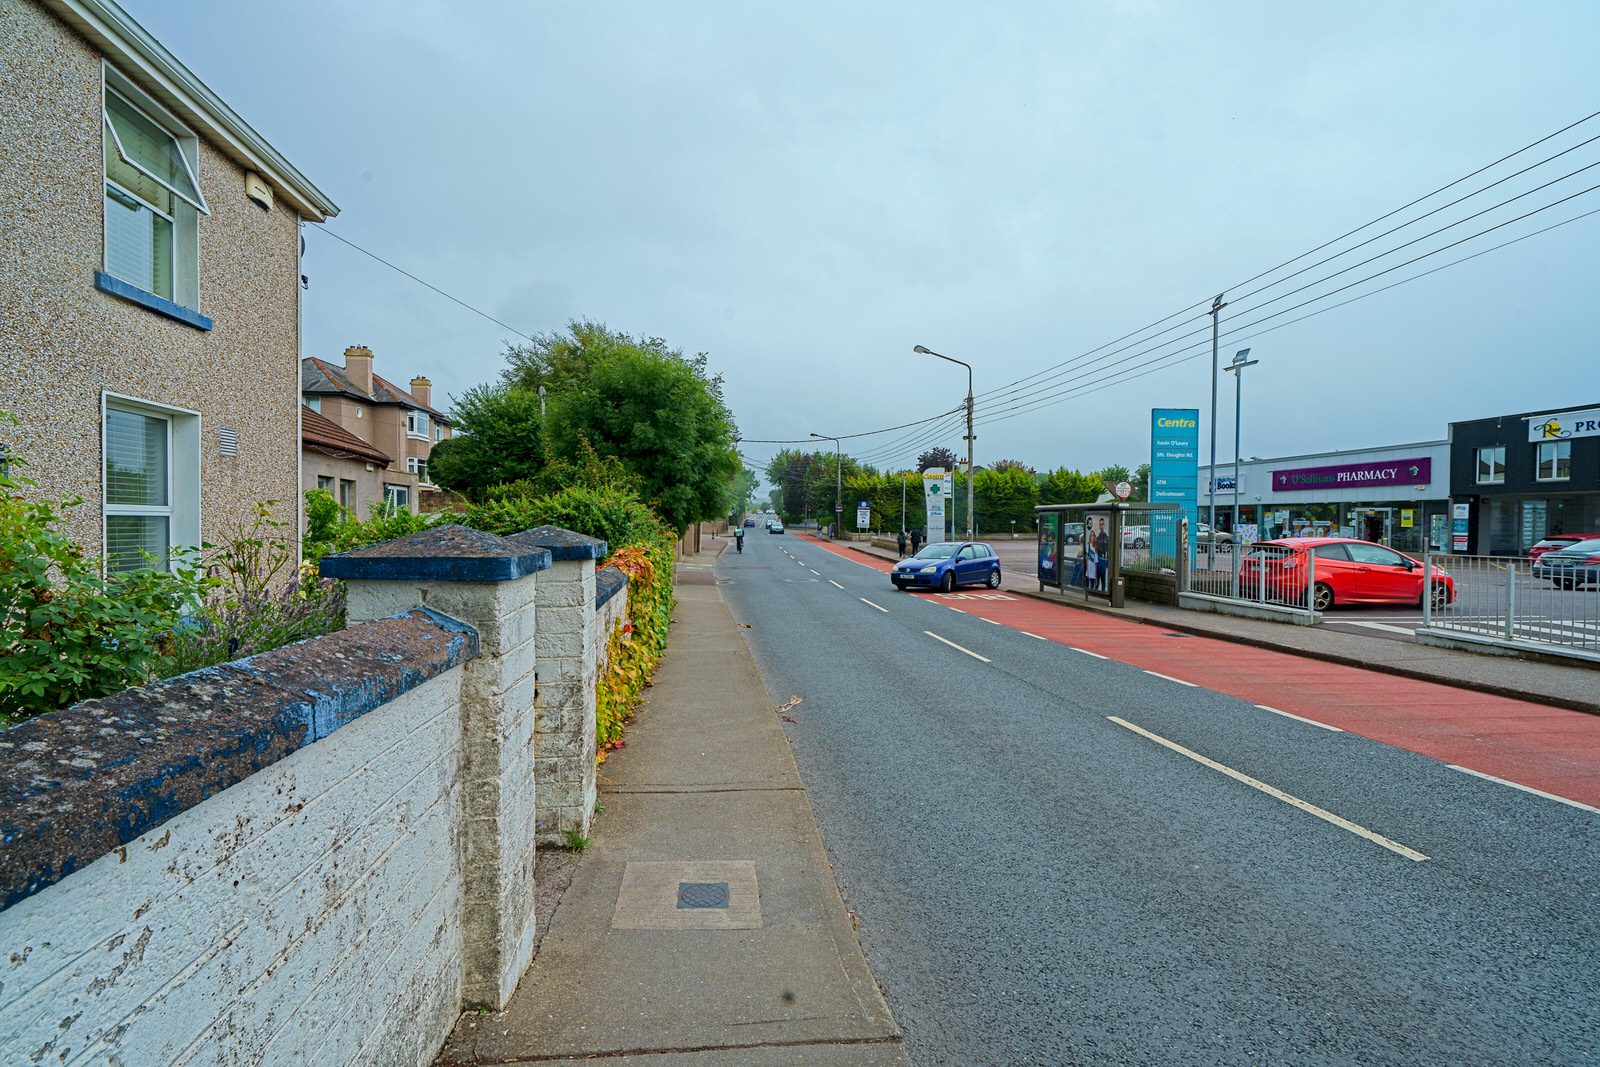 A WALK ALONG THE SOUTH DOUGLAS ROAD FROM THE HALF MOON BRIDGE TO TESCO [ON A WET WINDY DAY] 028